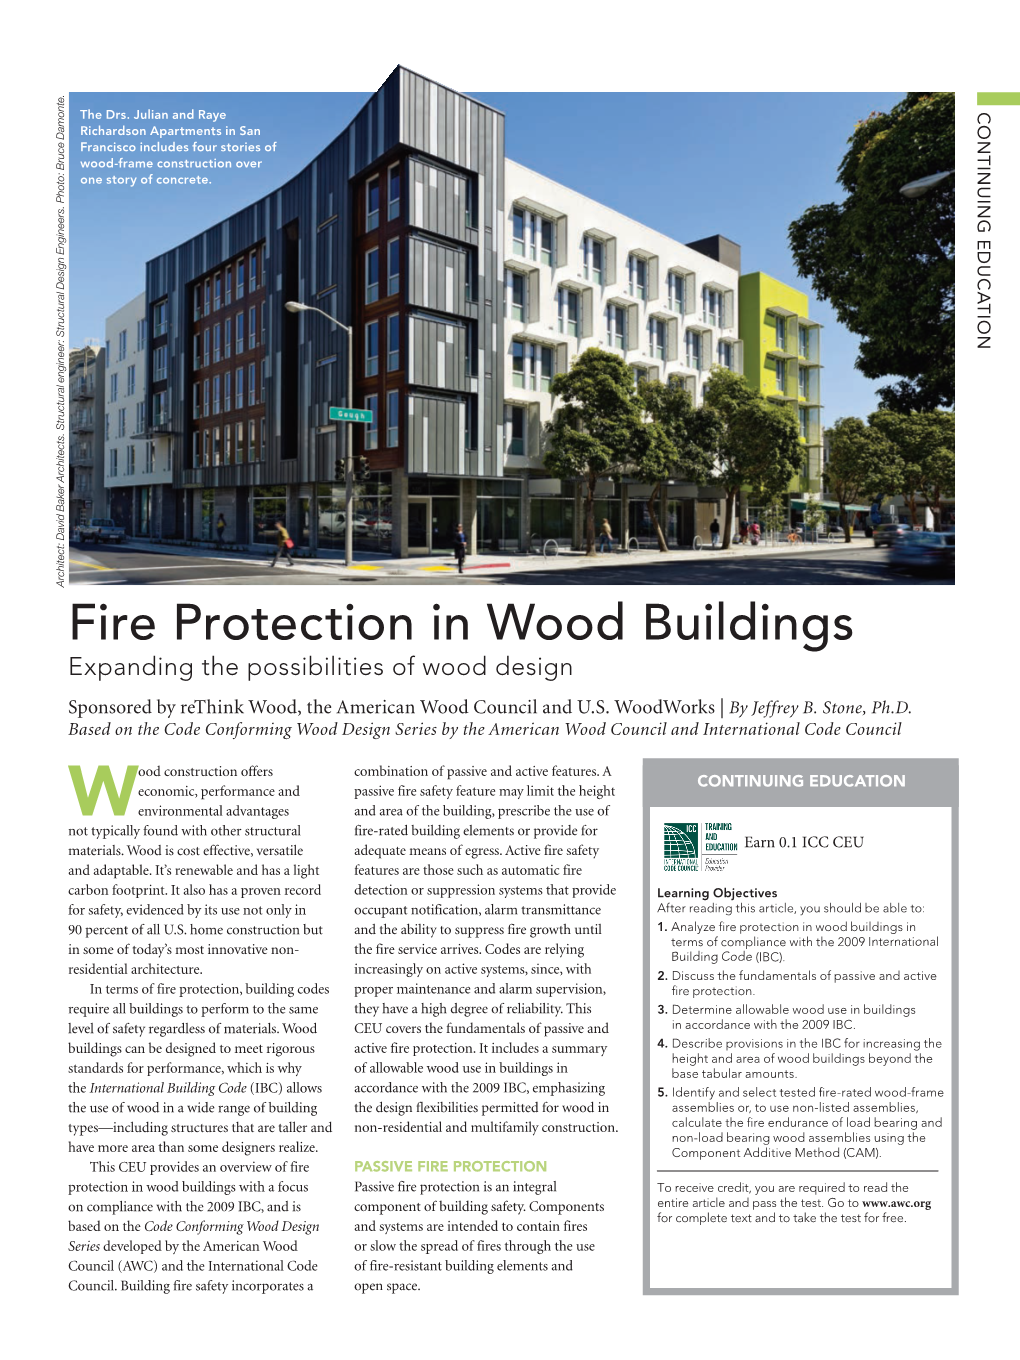 Fire Protection in Wood Buildings